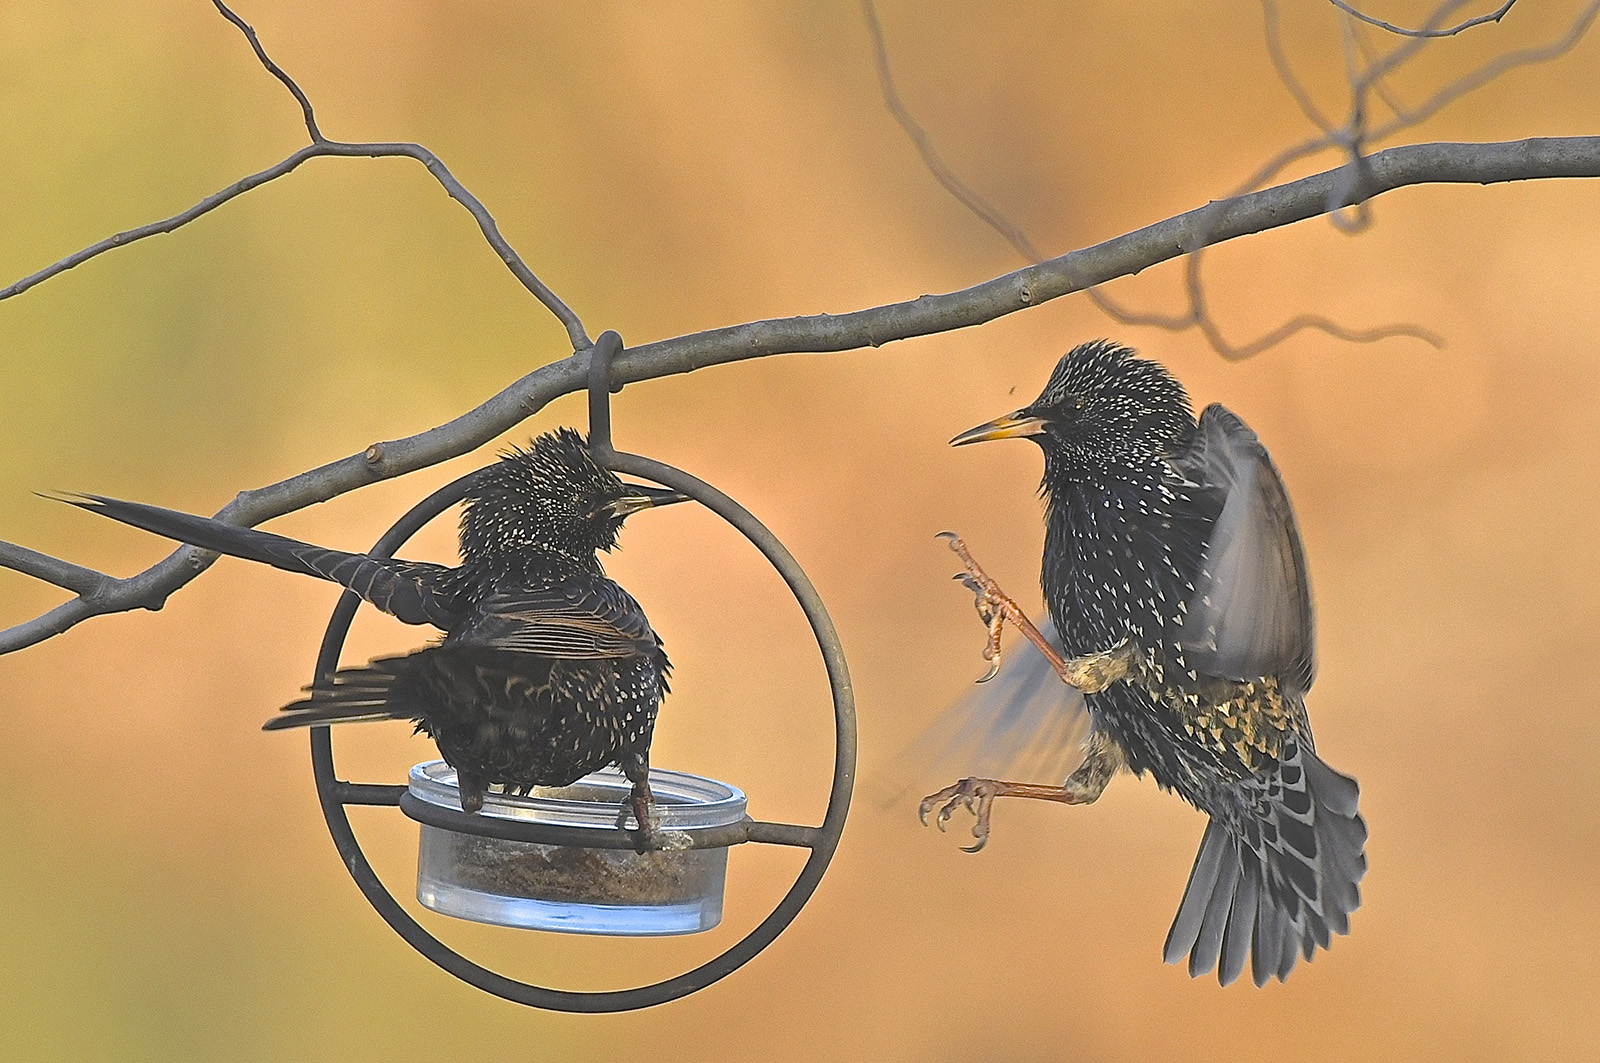 An image of two European starlings at a feeder